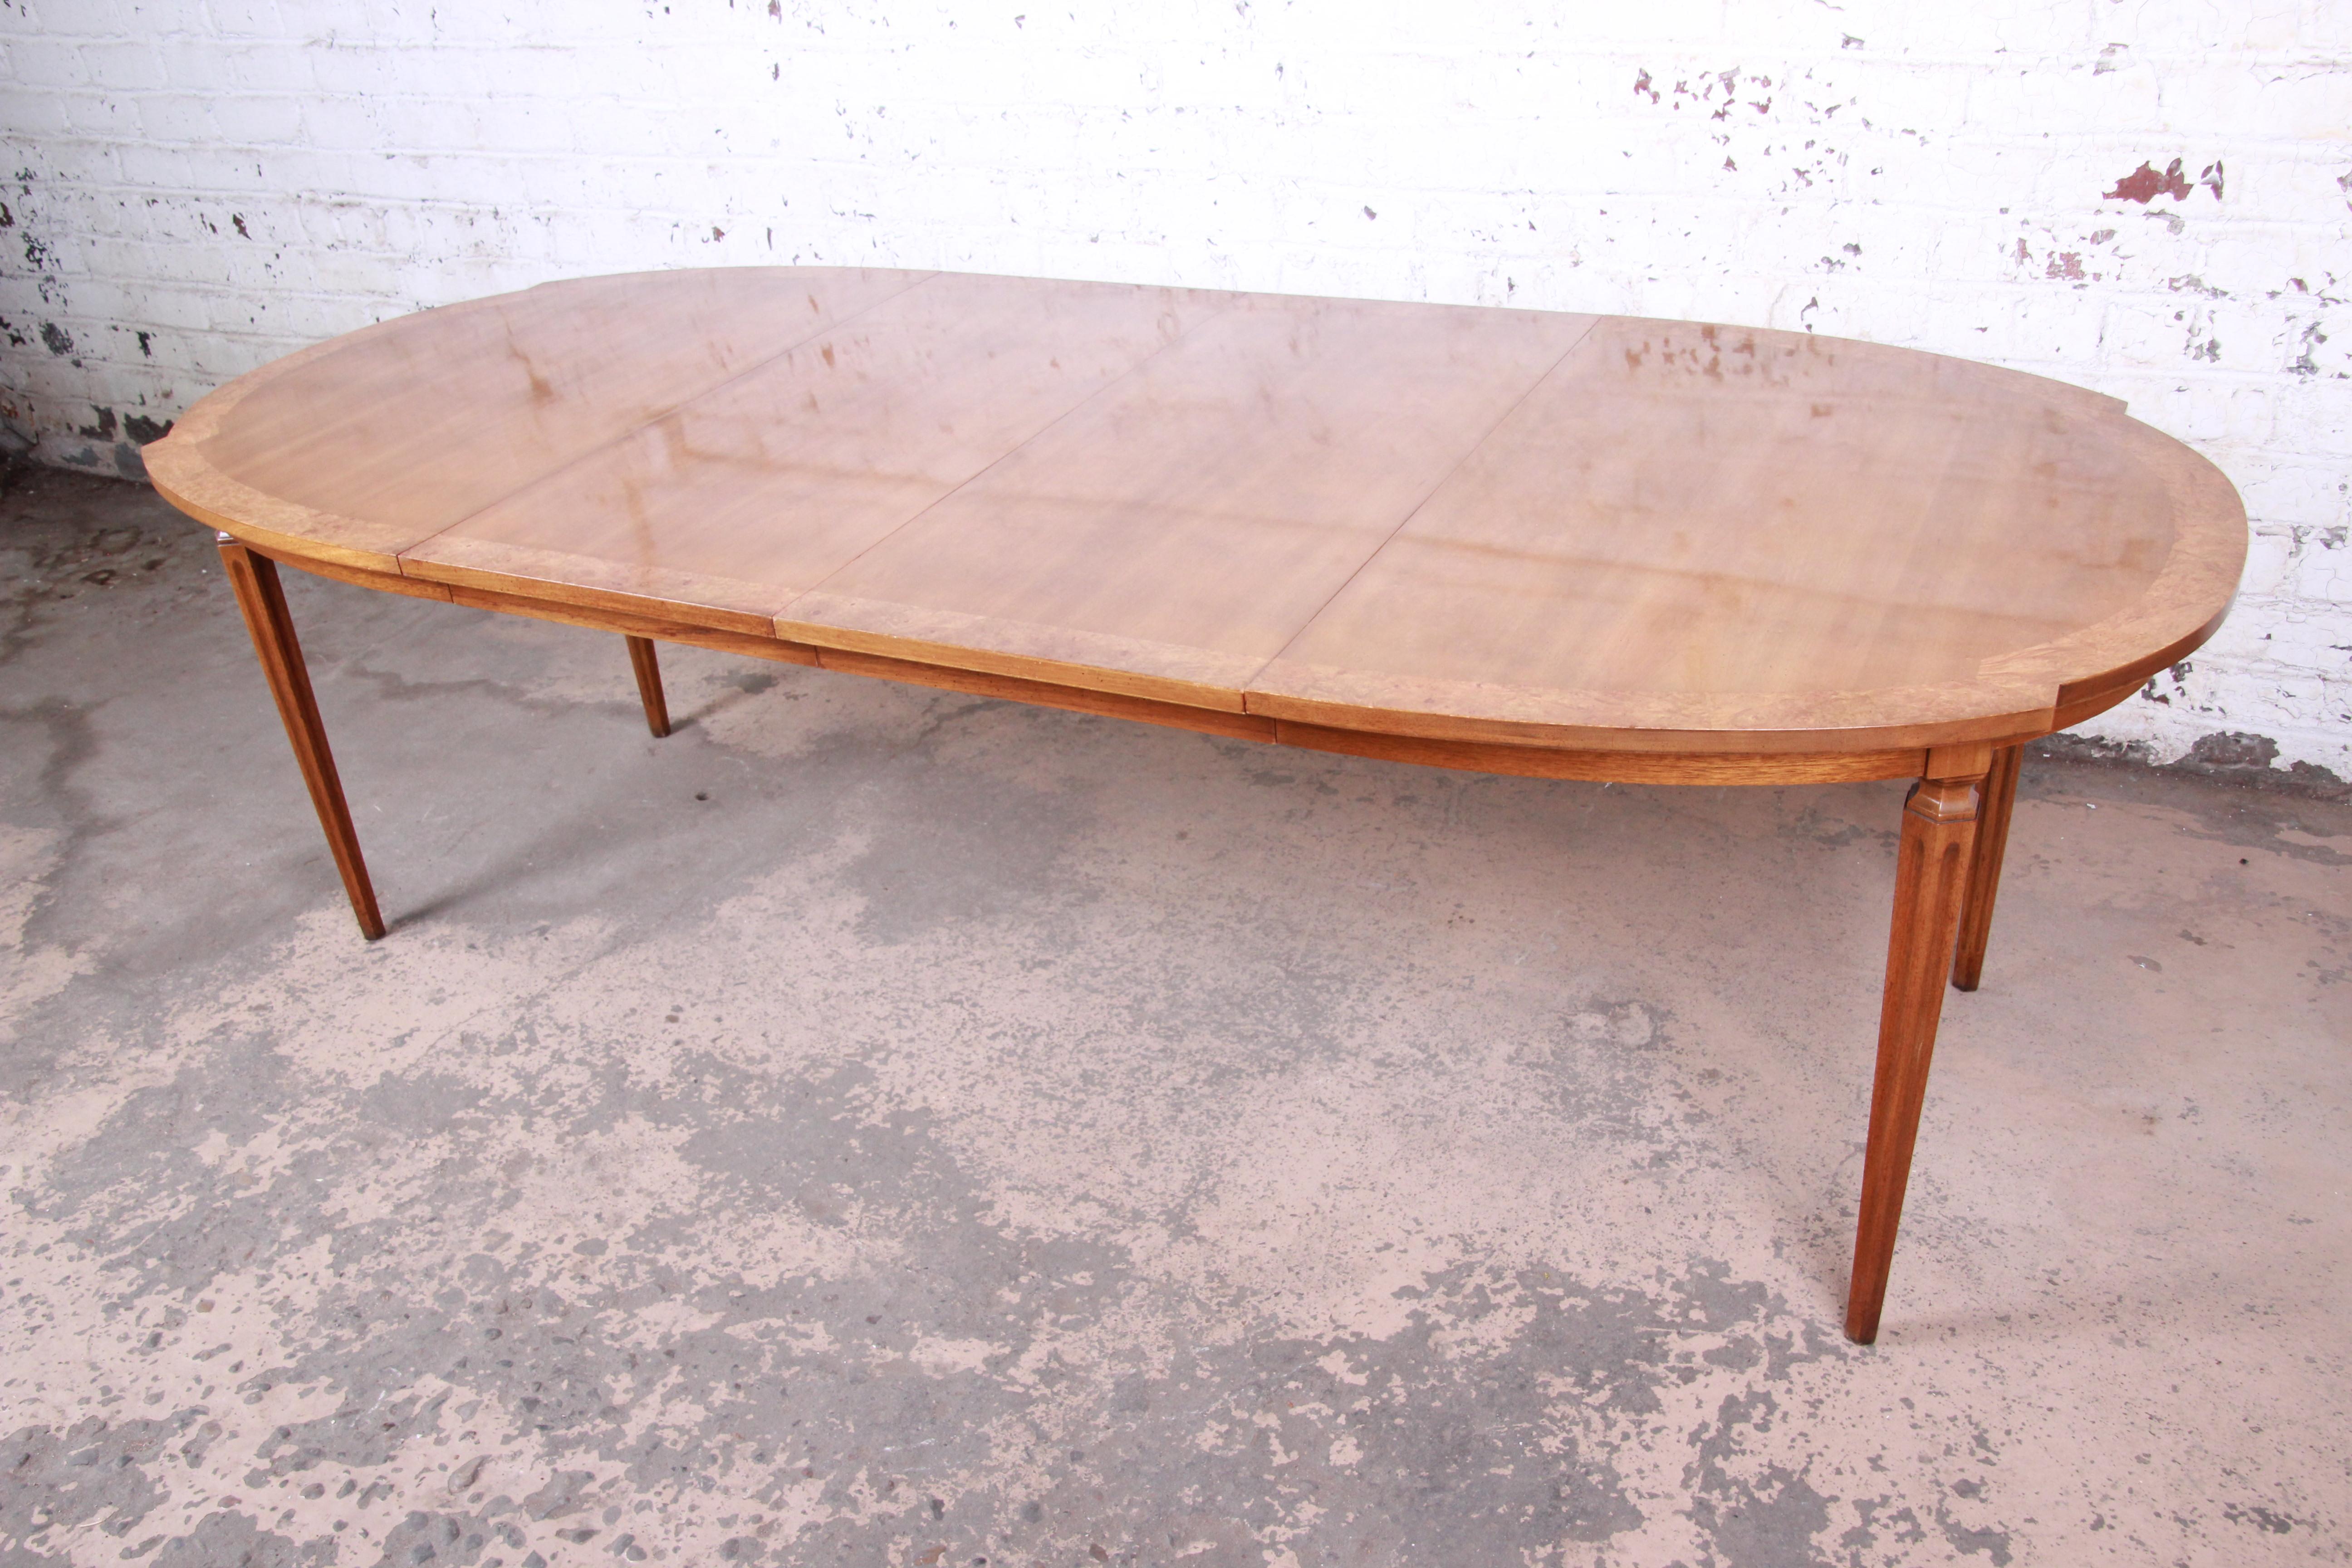 A gorgeous Mid-Century Modern Hollywood Regency extension dining table from the 